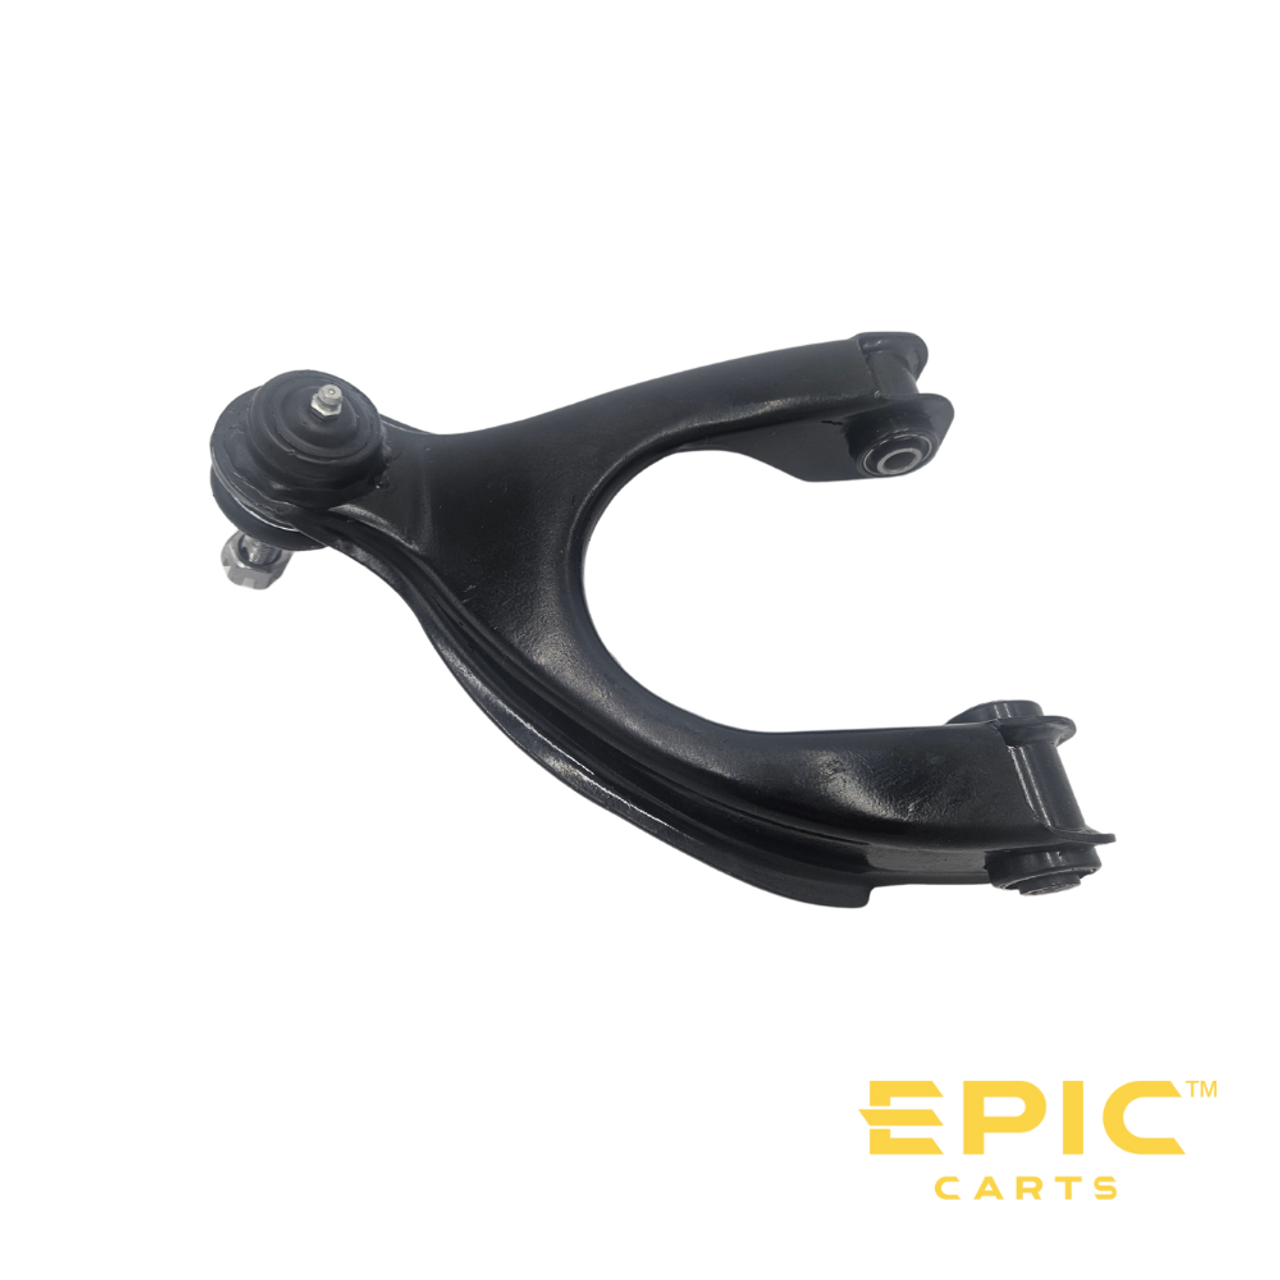 Passenger Side (Right) Top A-Arm for EPIC Golf Cart, SR-EP618, 3102012032